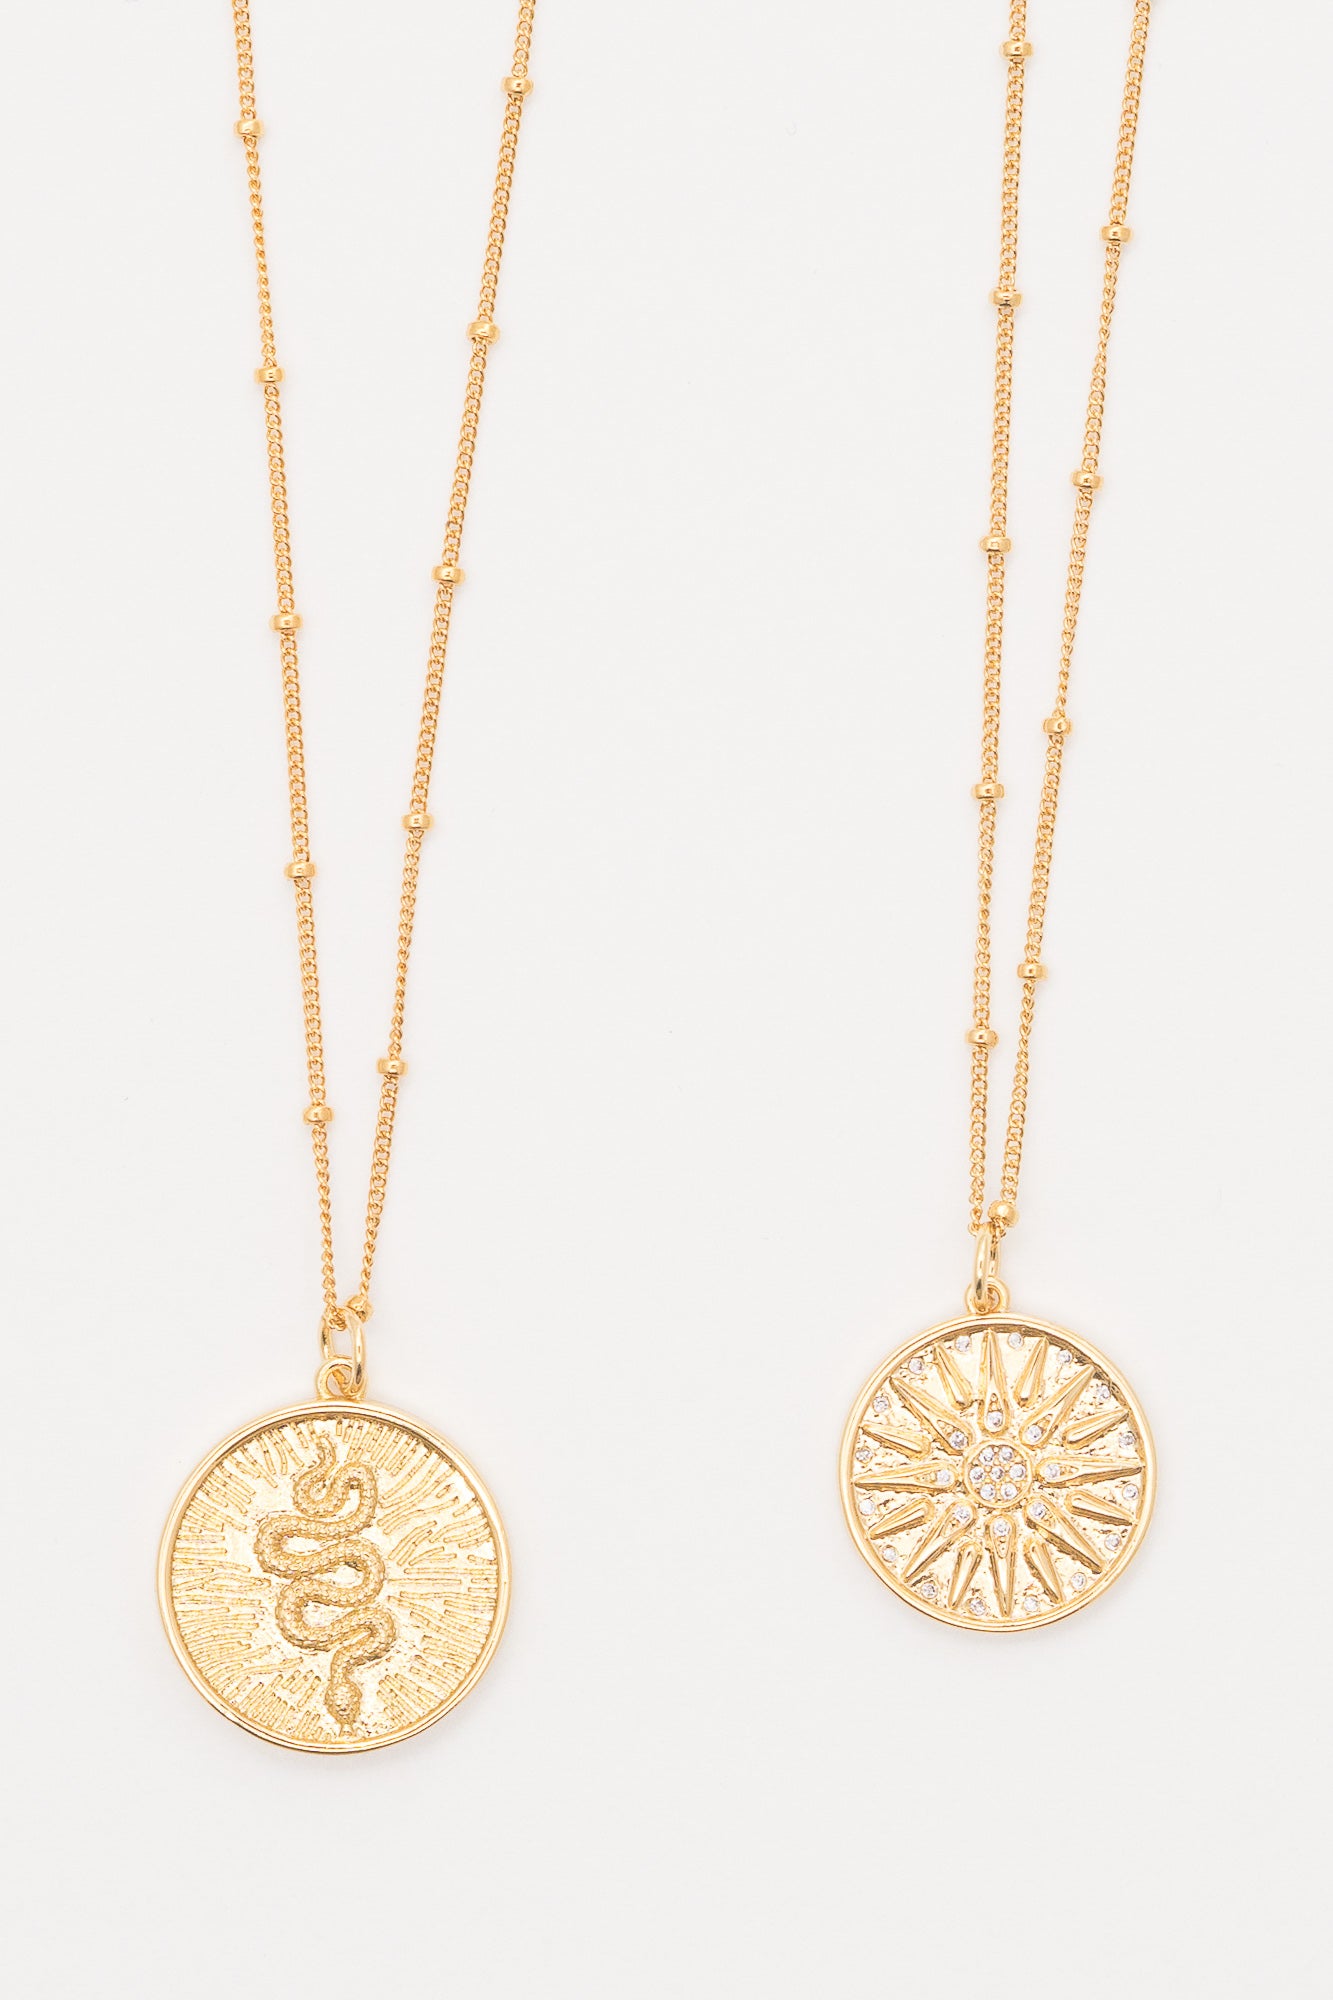 gold layering necklaces with snake charm and starburst charm pendants